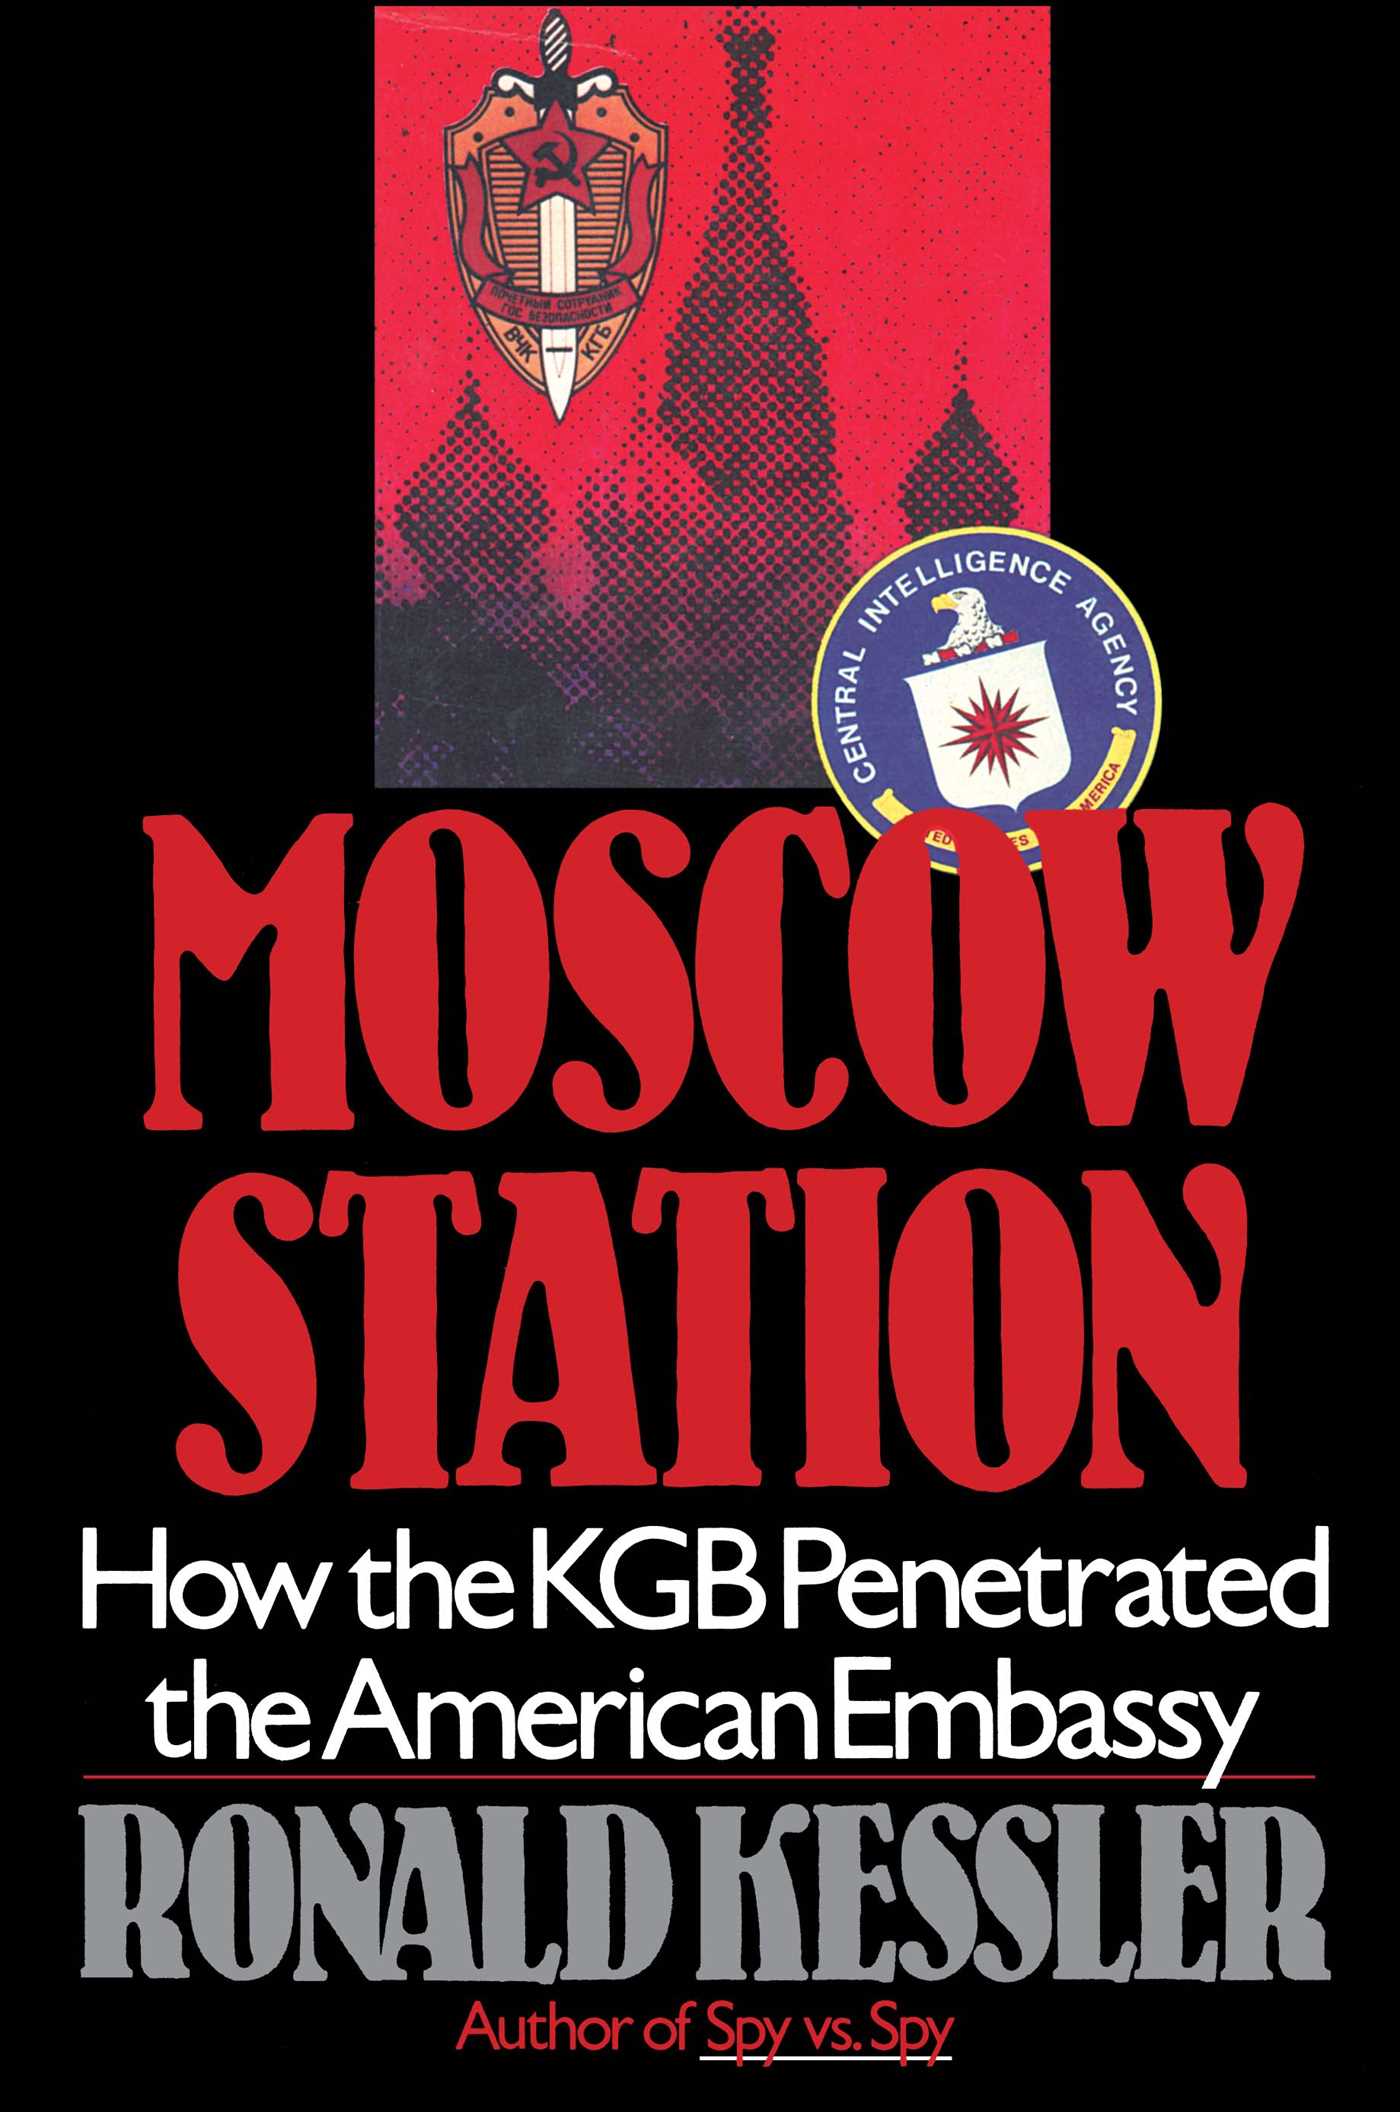 Moscow Station (Paperback) - image 1 of 1